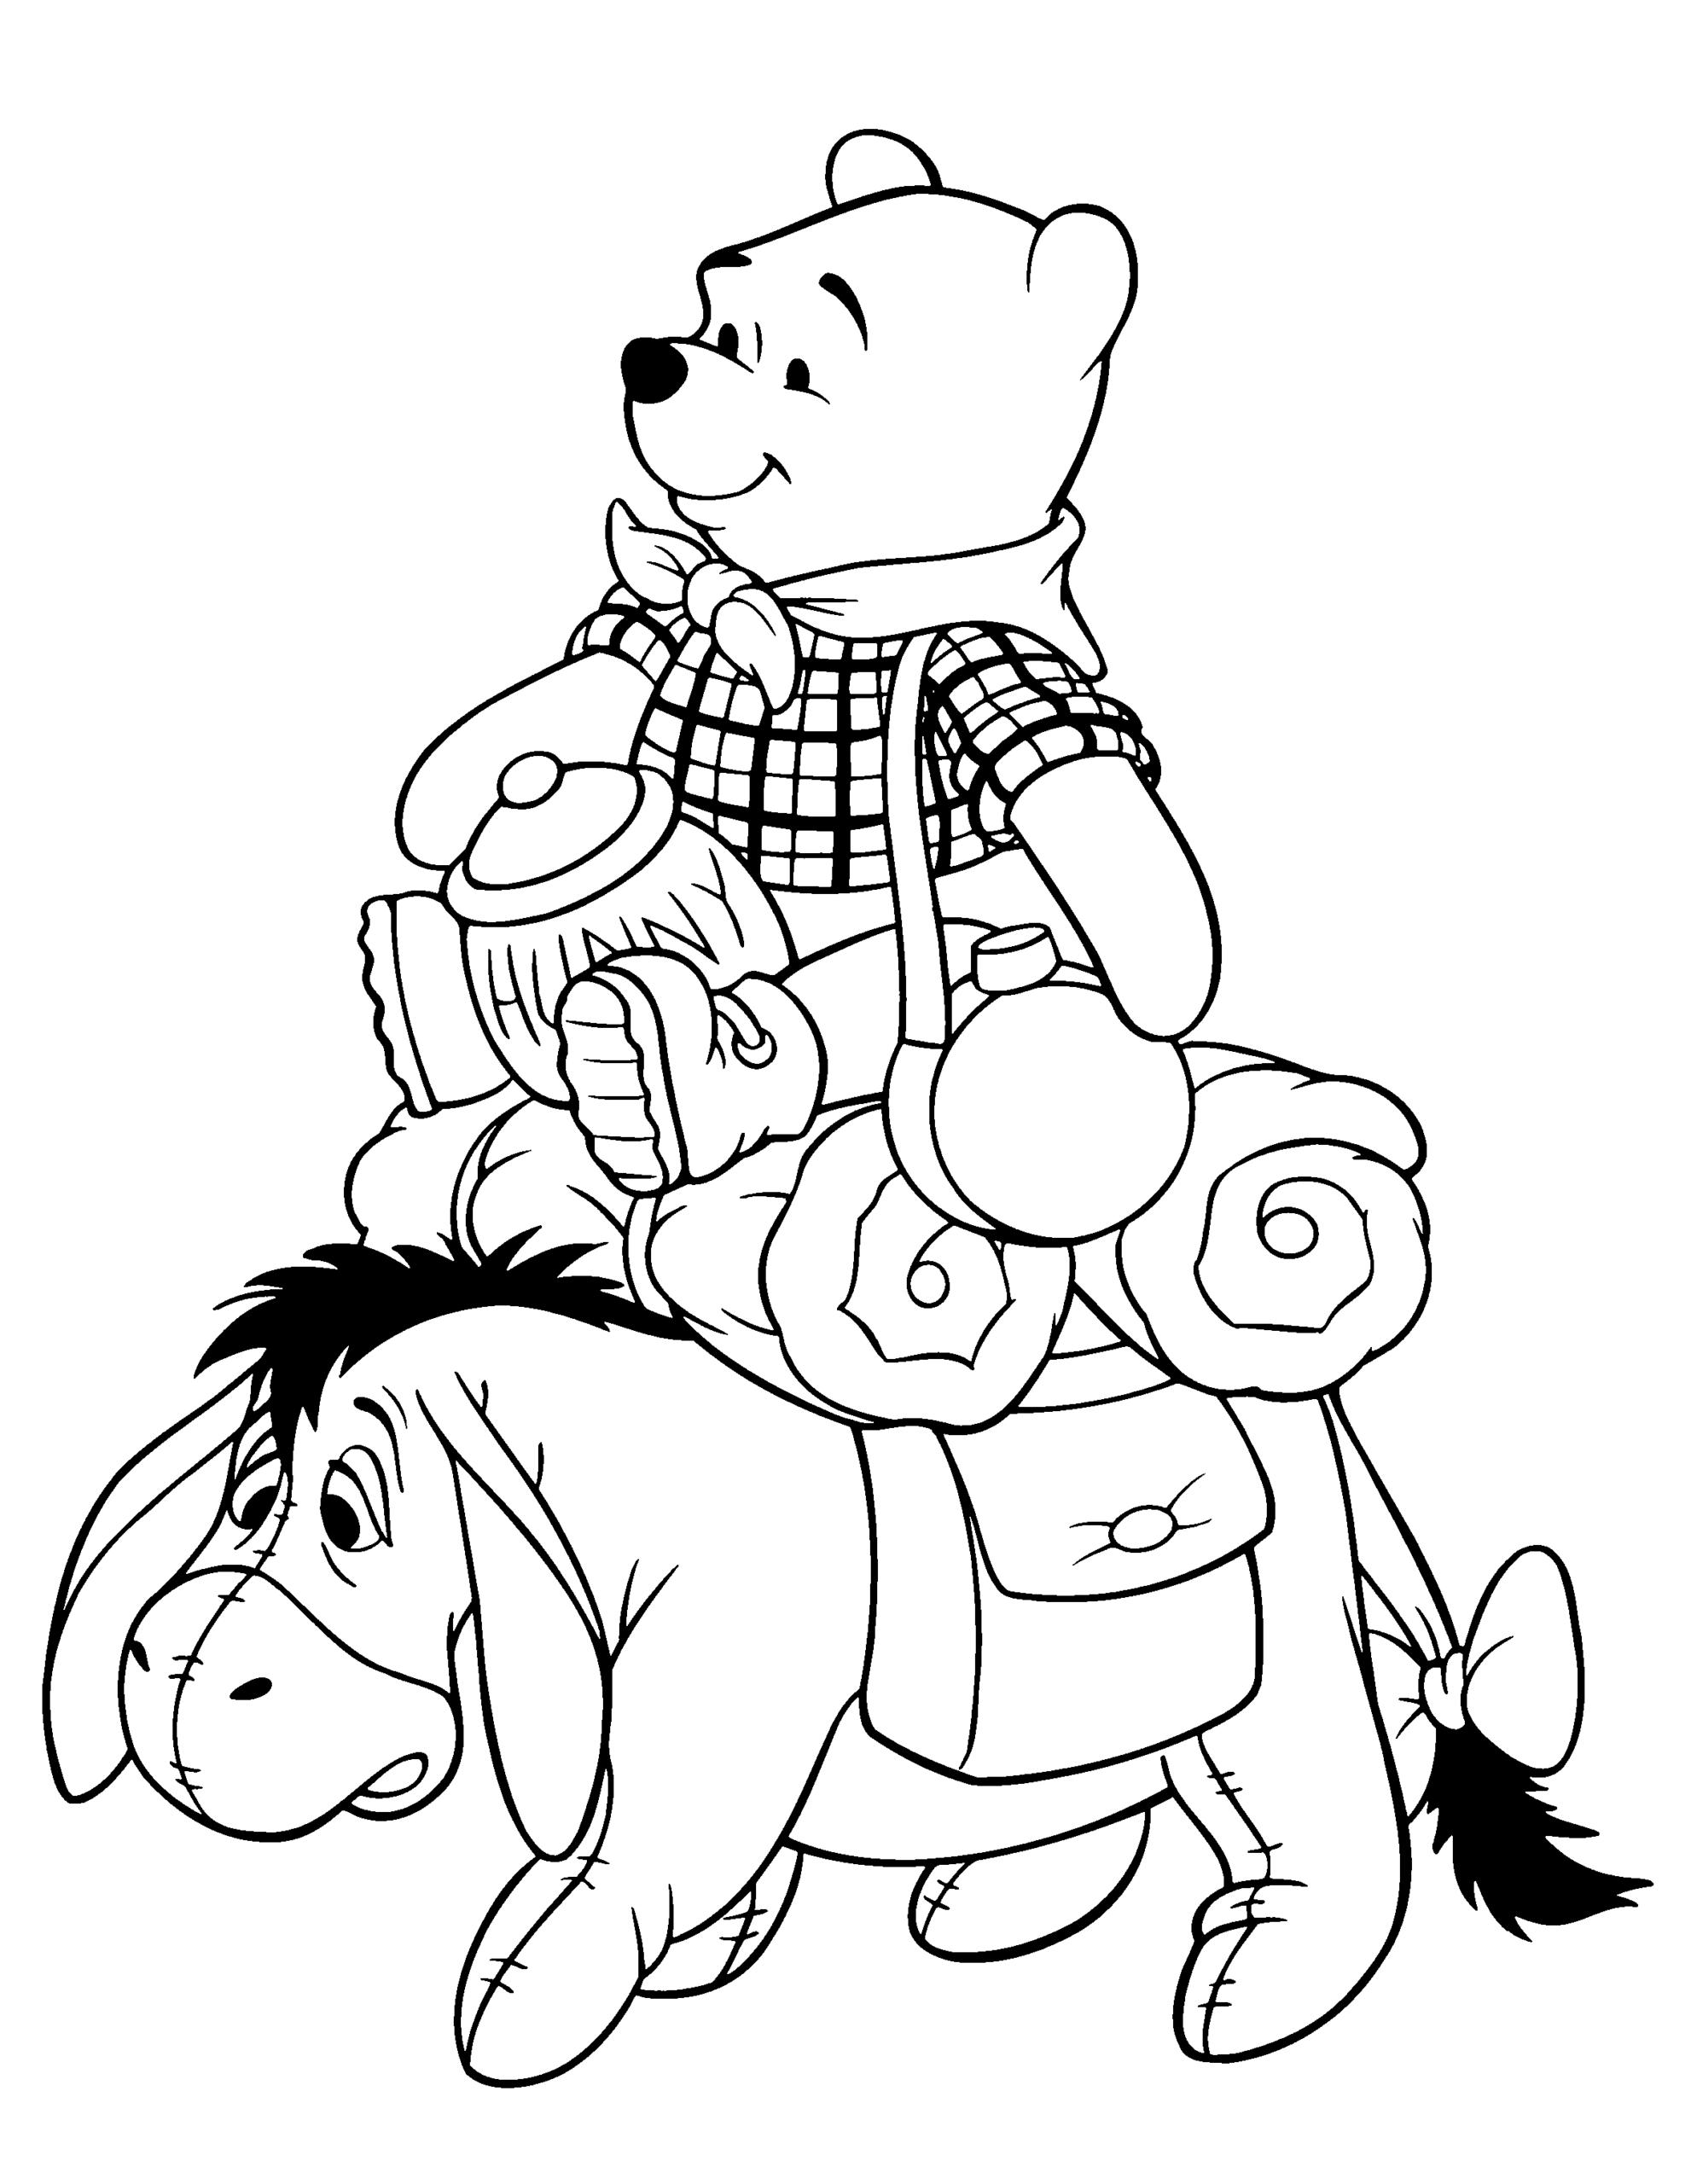 Winnie the Pooh Coloring Pages Cartoons winnie the pooh 59 Printable 2020 7174 Coloring4free